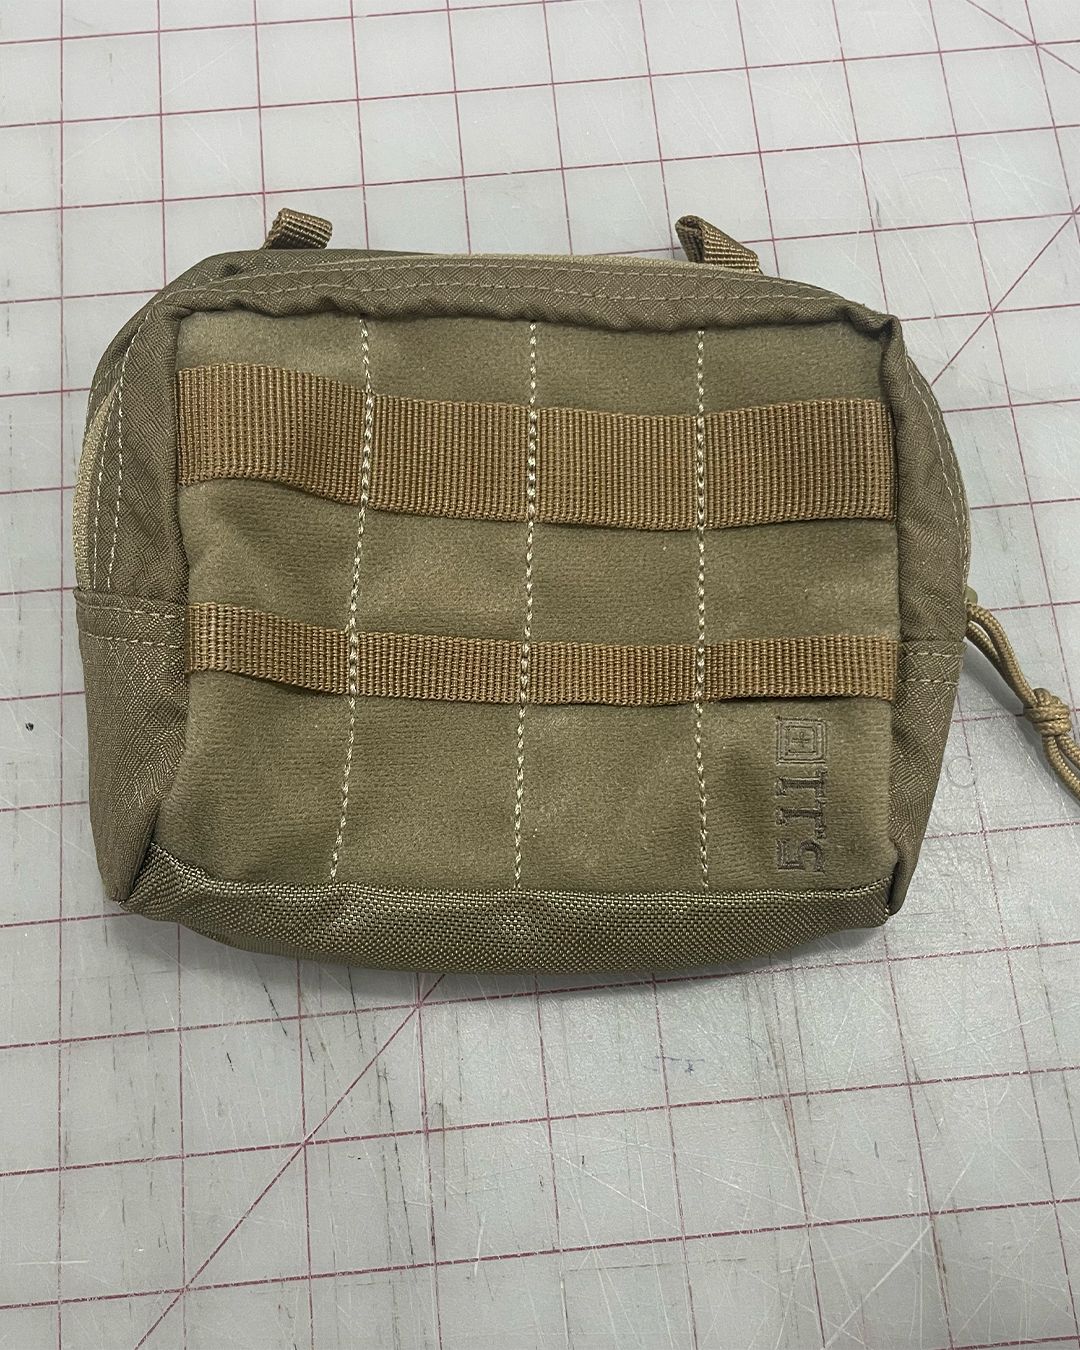 NEW – 5.11 Ignitor 6.5 Pouch